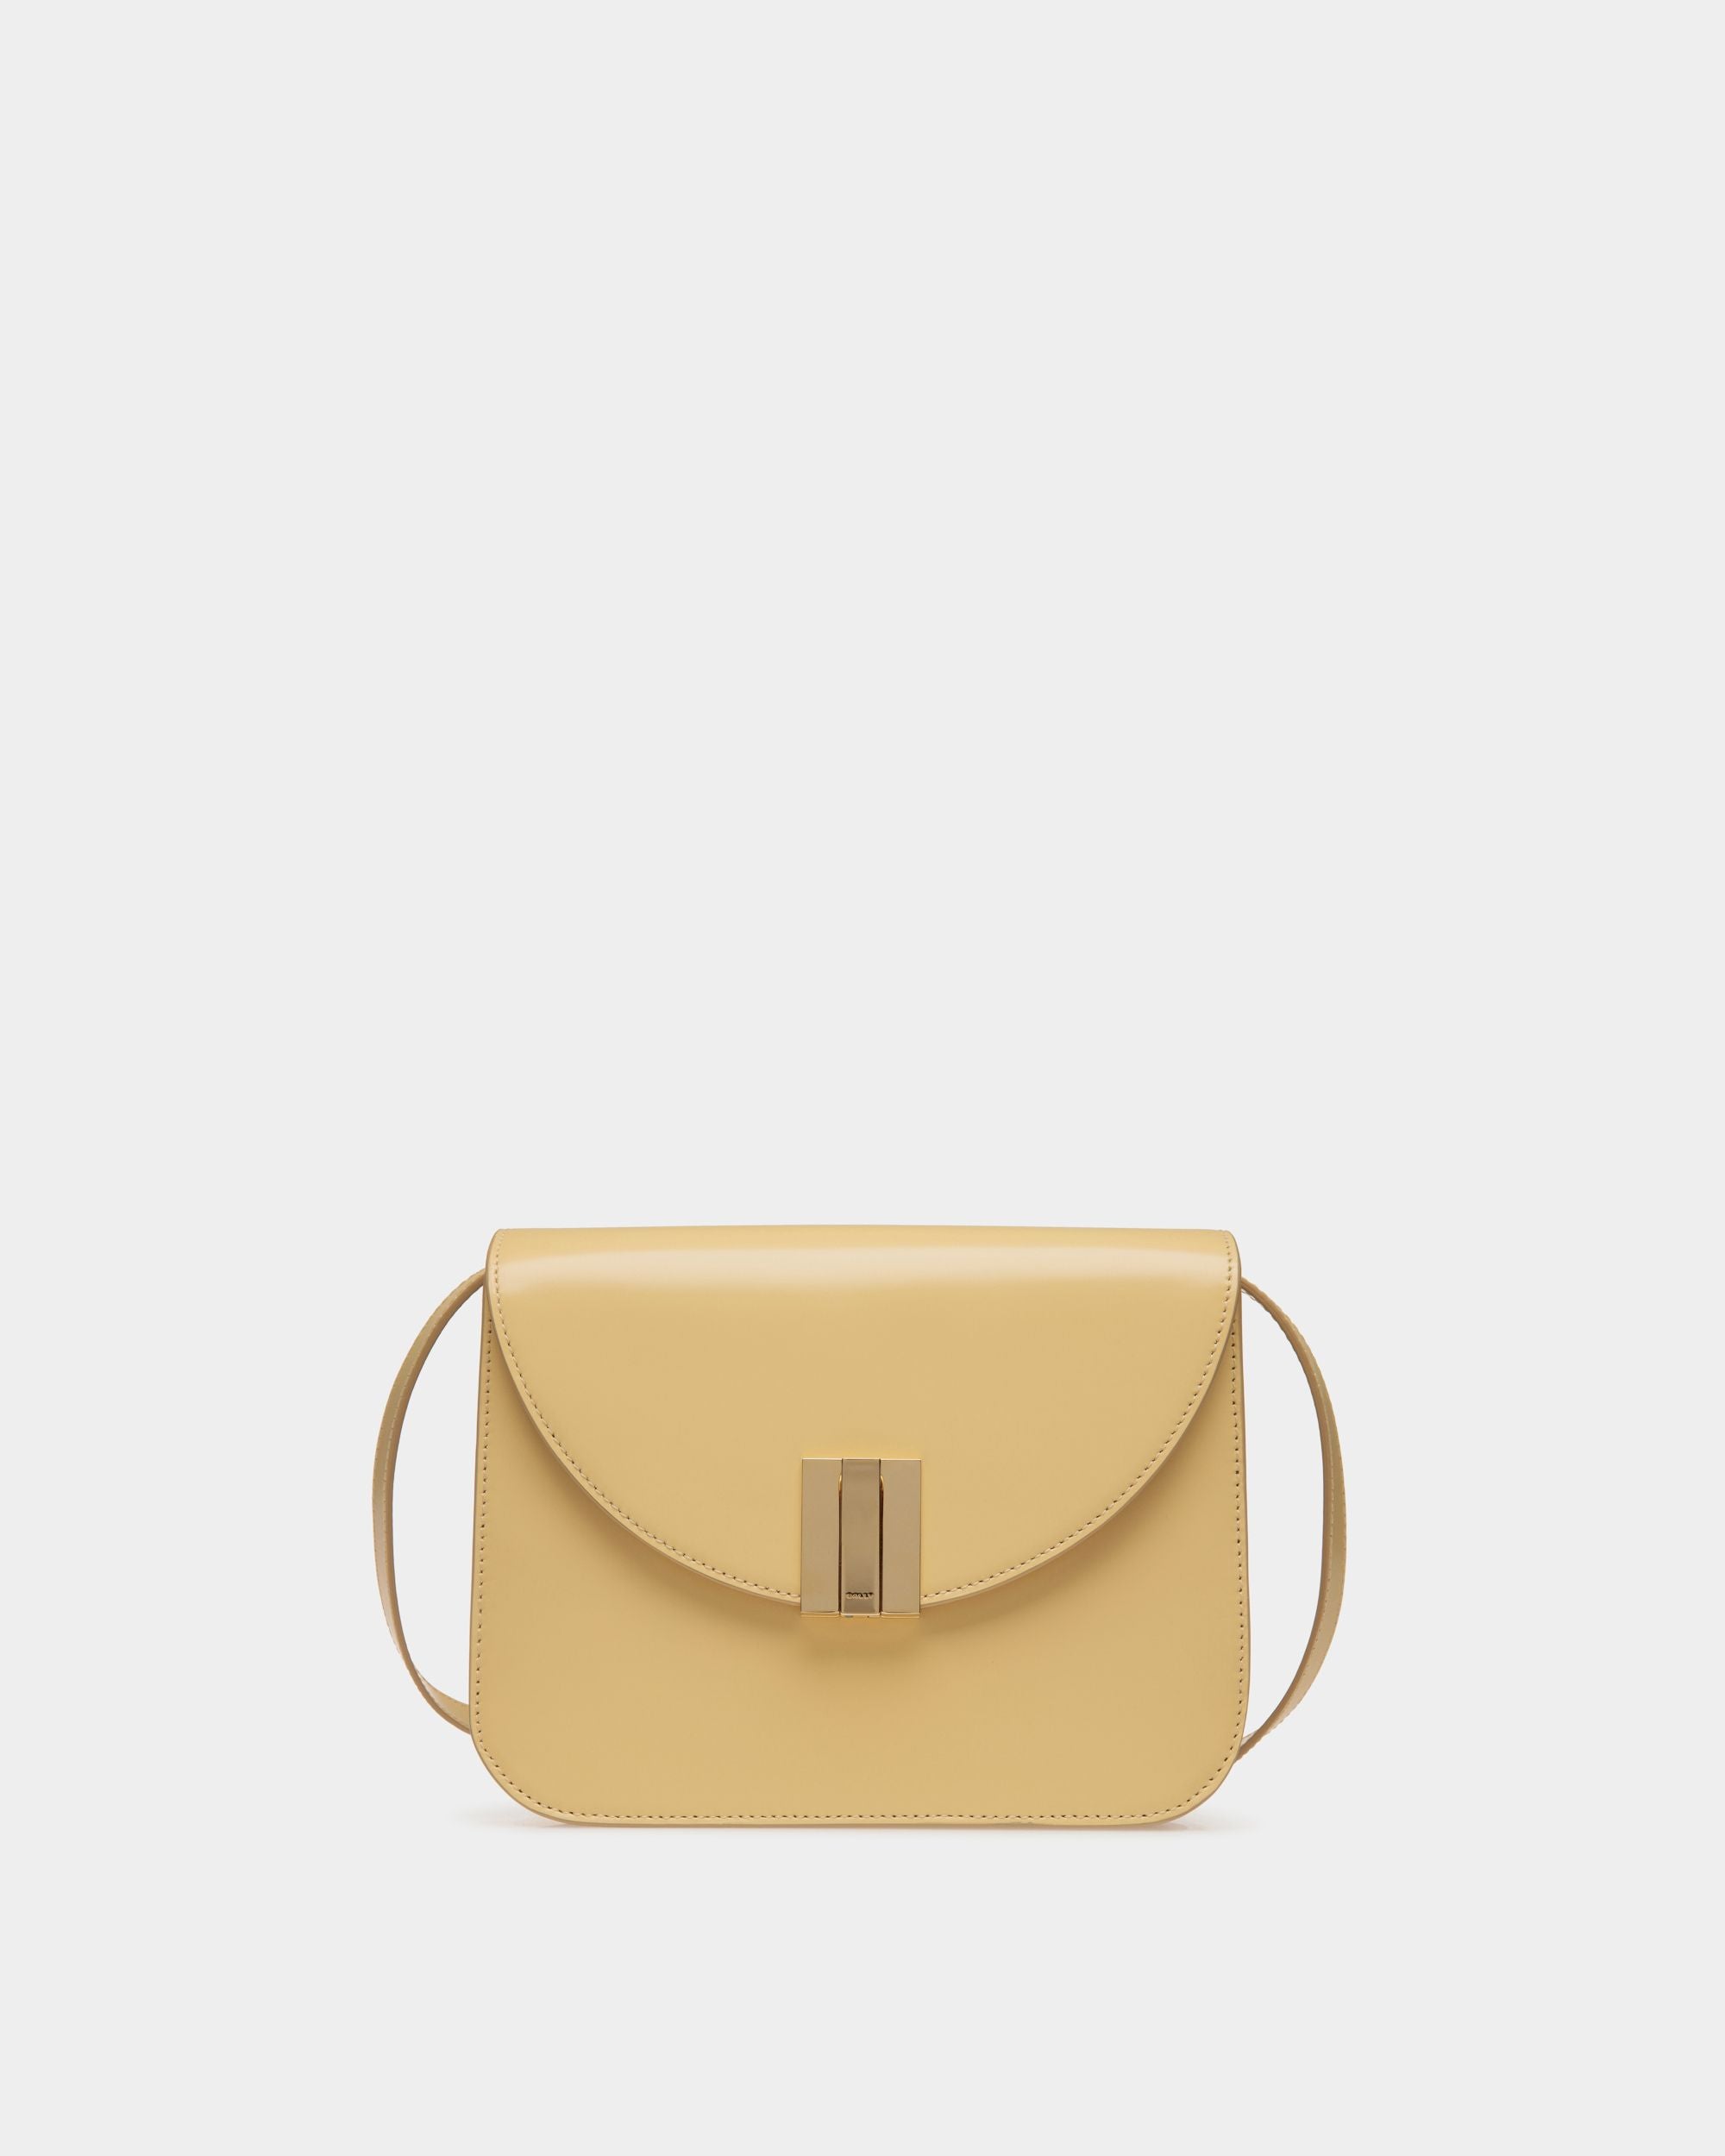 Women's Ollam Crossbody Bag in Cream Brushed Leather | Bally | Still Life Front